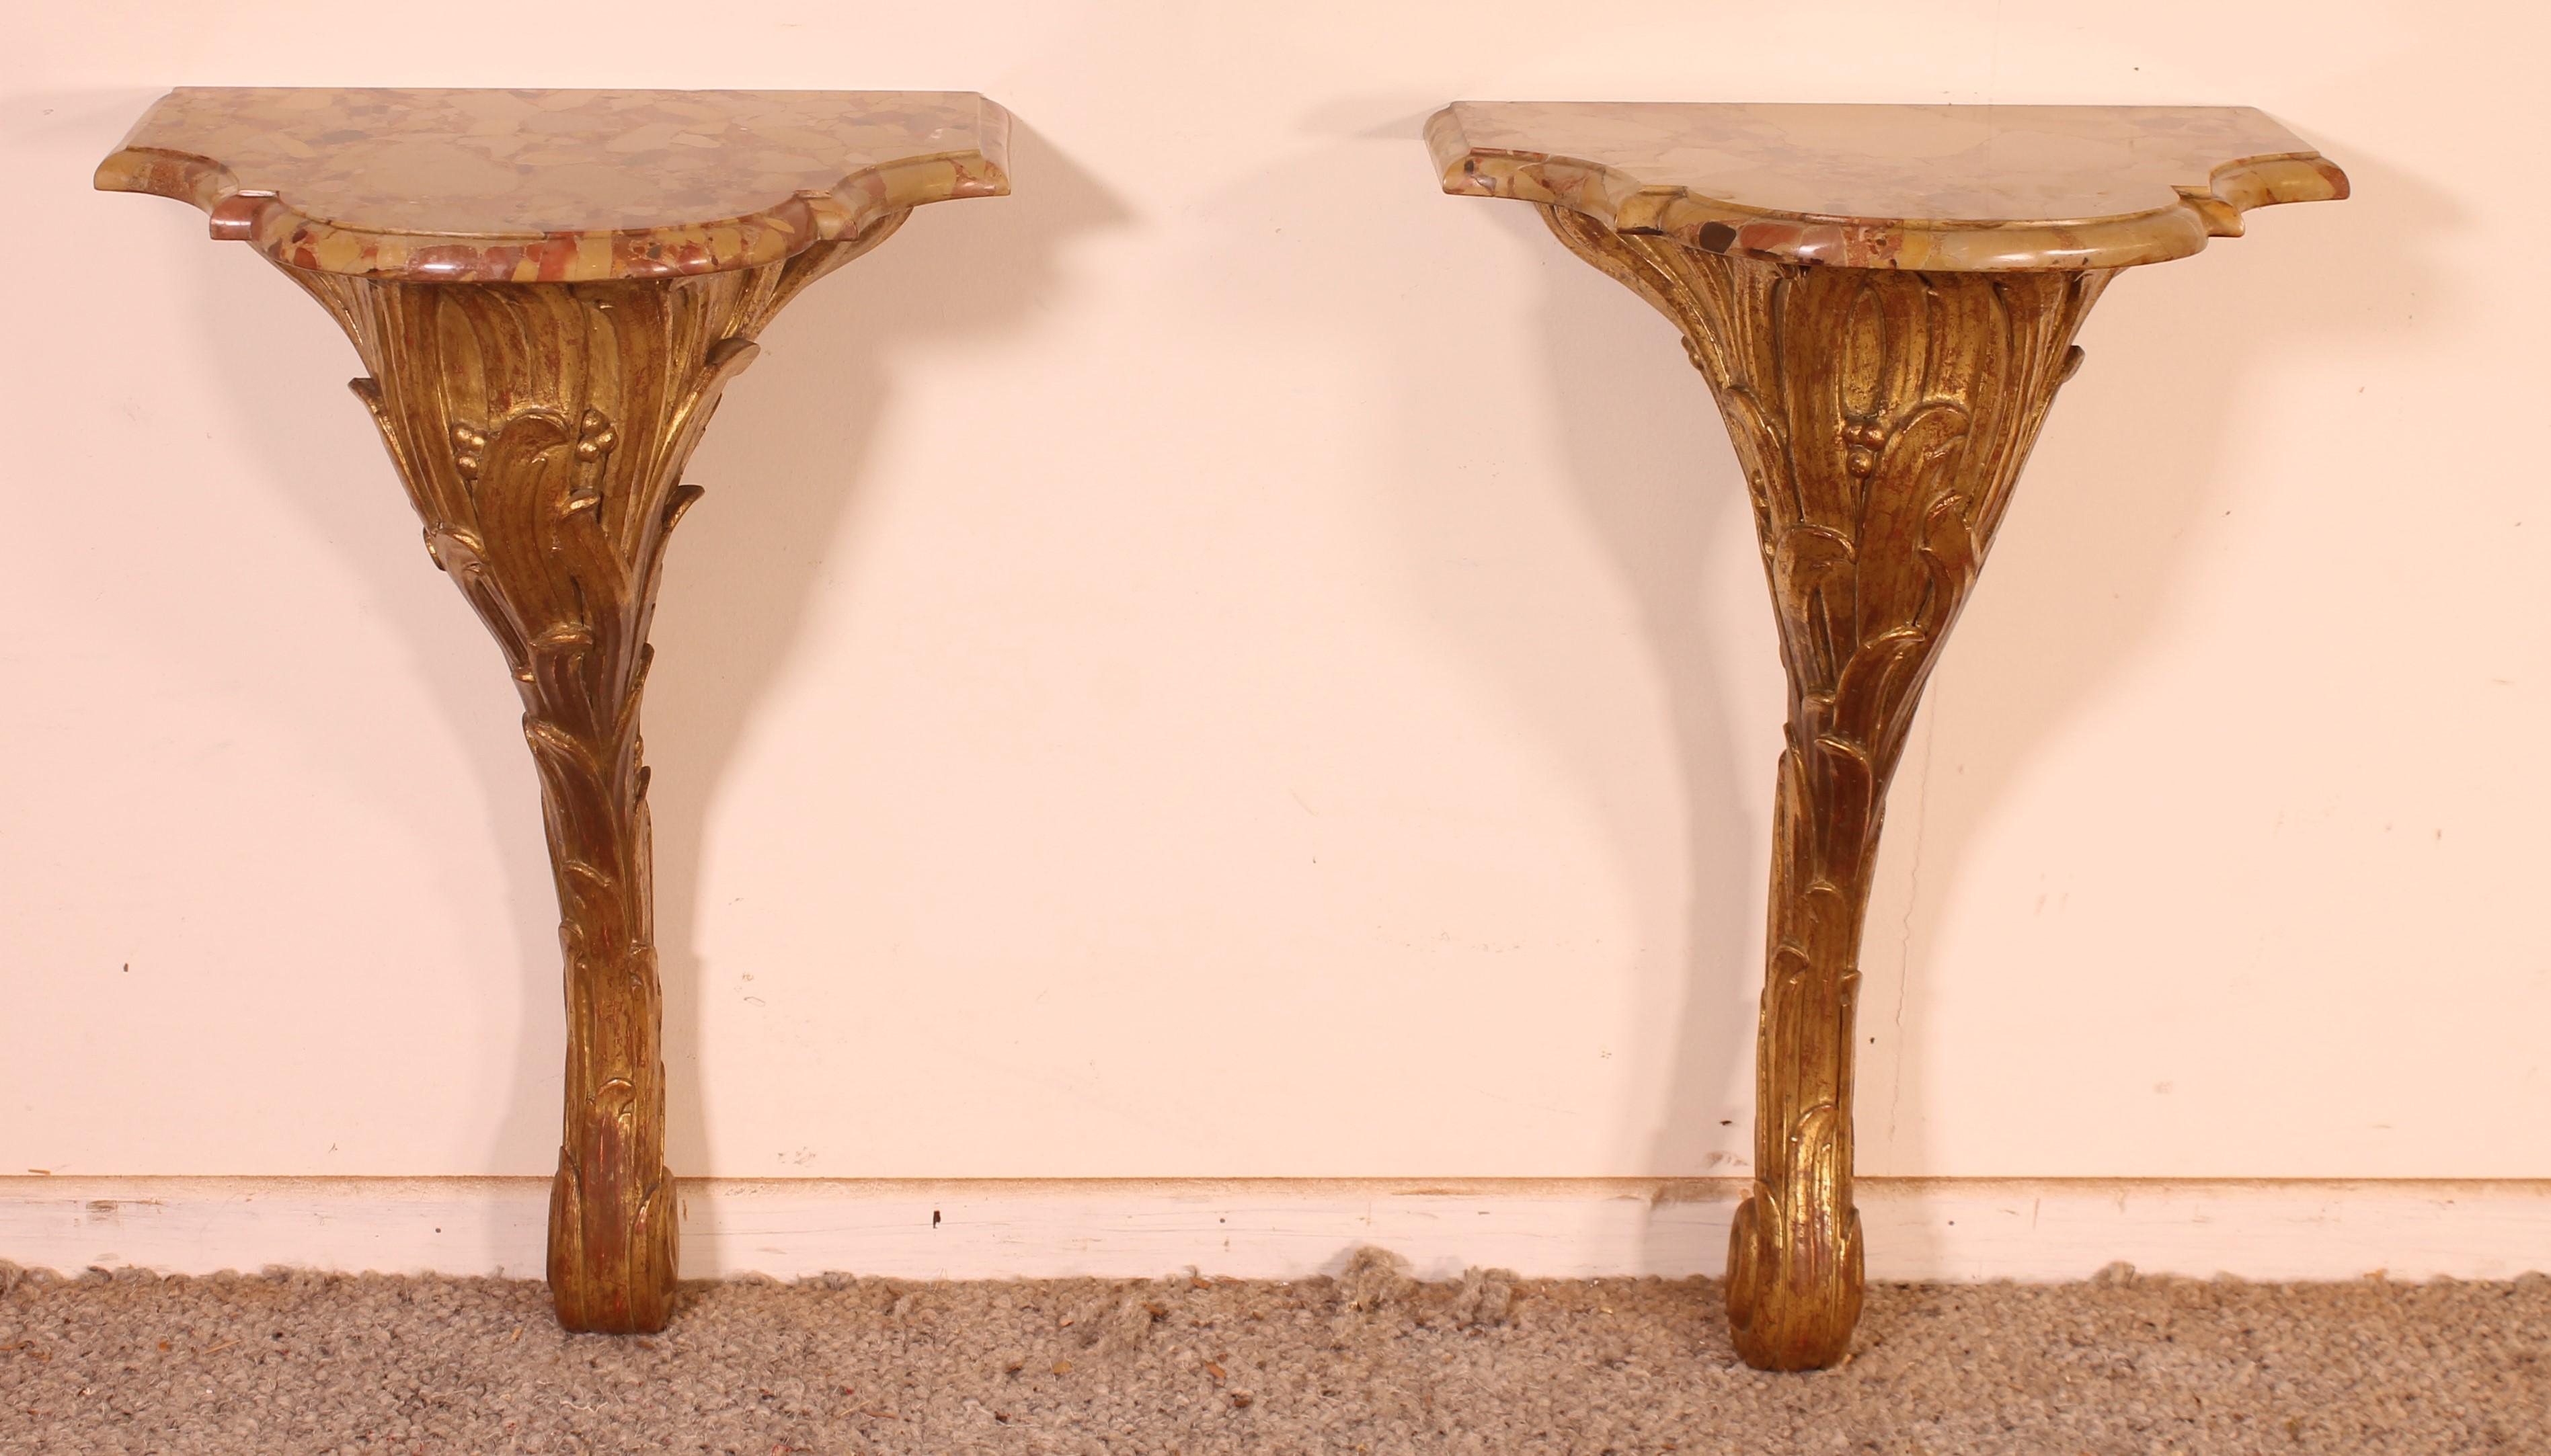 Very nice pair of small Louis XV style consoles from the end of the 19th century in gilded wood
Lovely pair in carved wood topped with a breccia marble which has very beautiful curves and a corbin beak.
The consoles can be used as consoles or as a